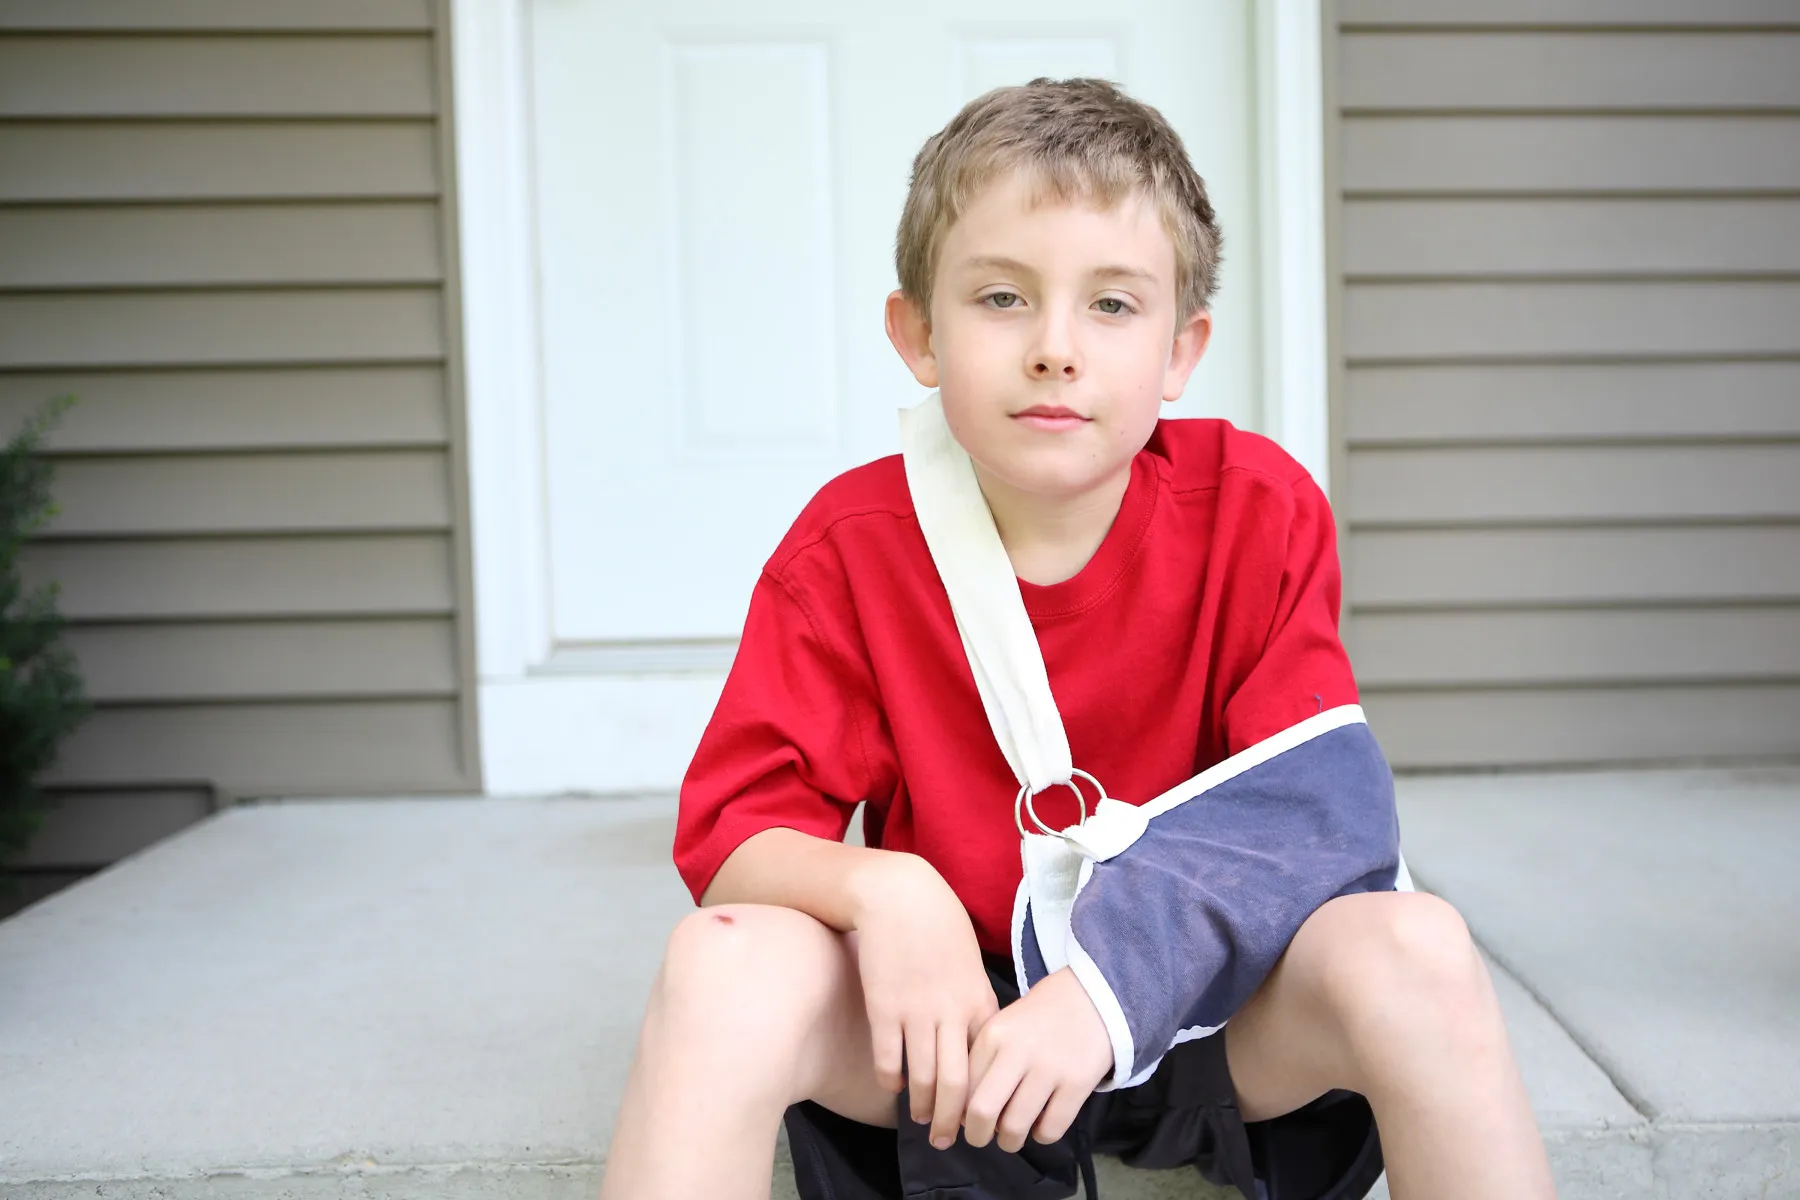 Youth Sports Injuries